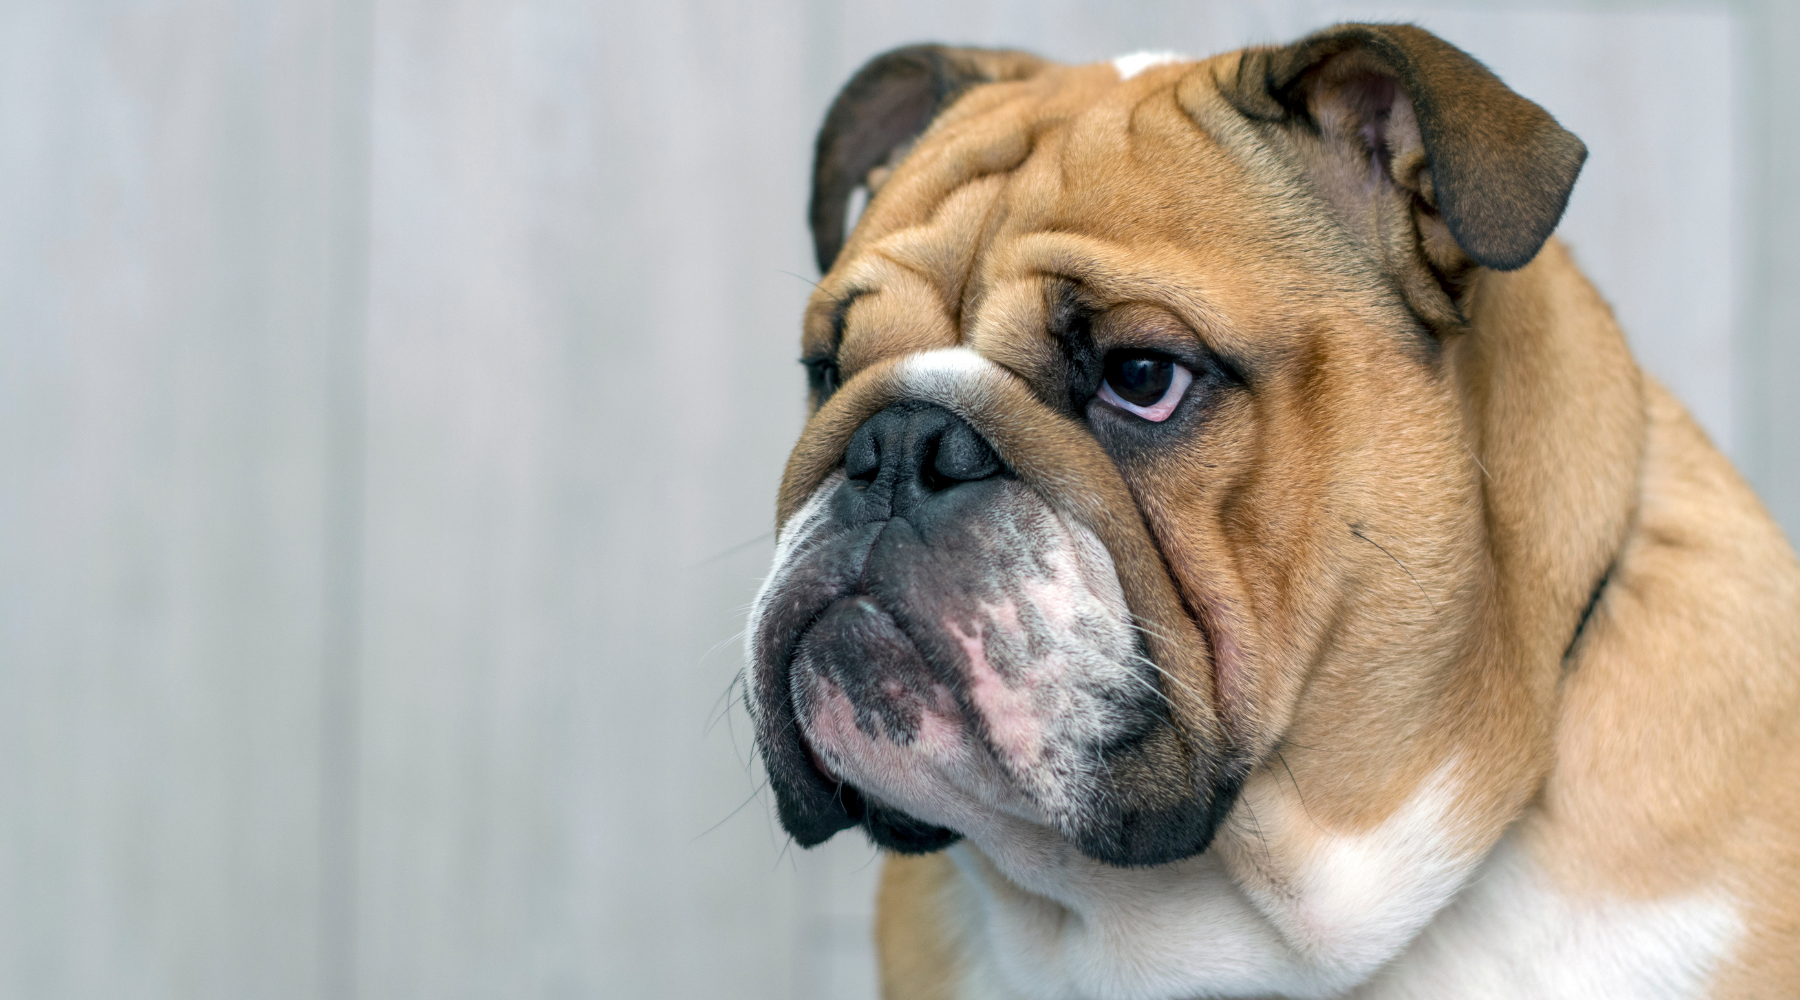 Why Does My Bulldog Have Dry and Flaky Skin? – Squishface